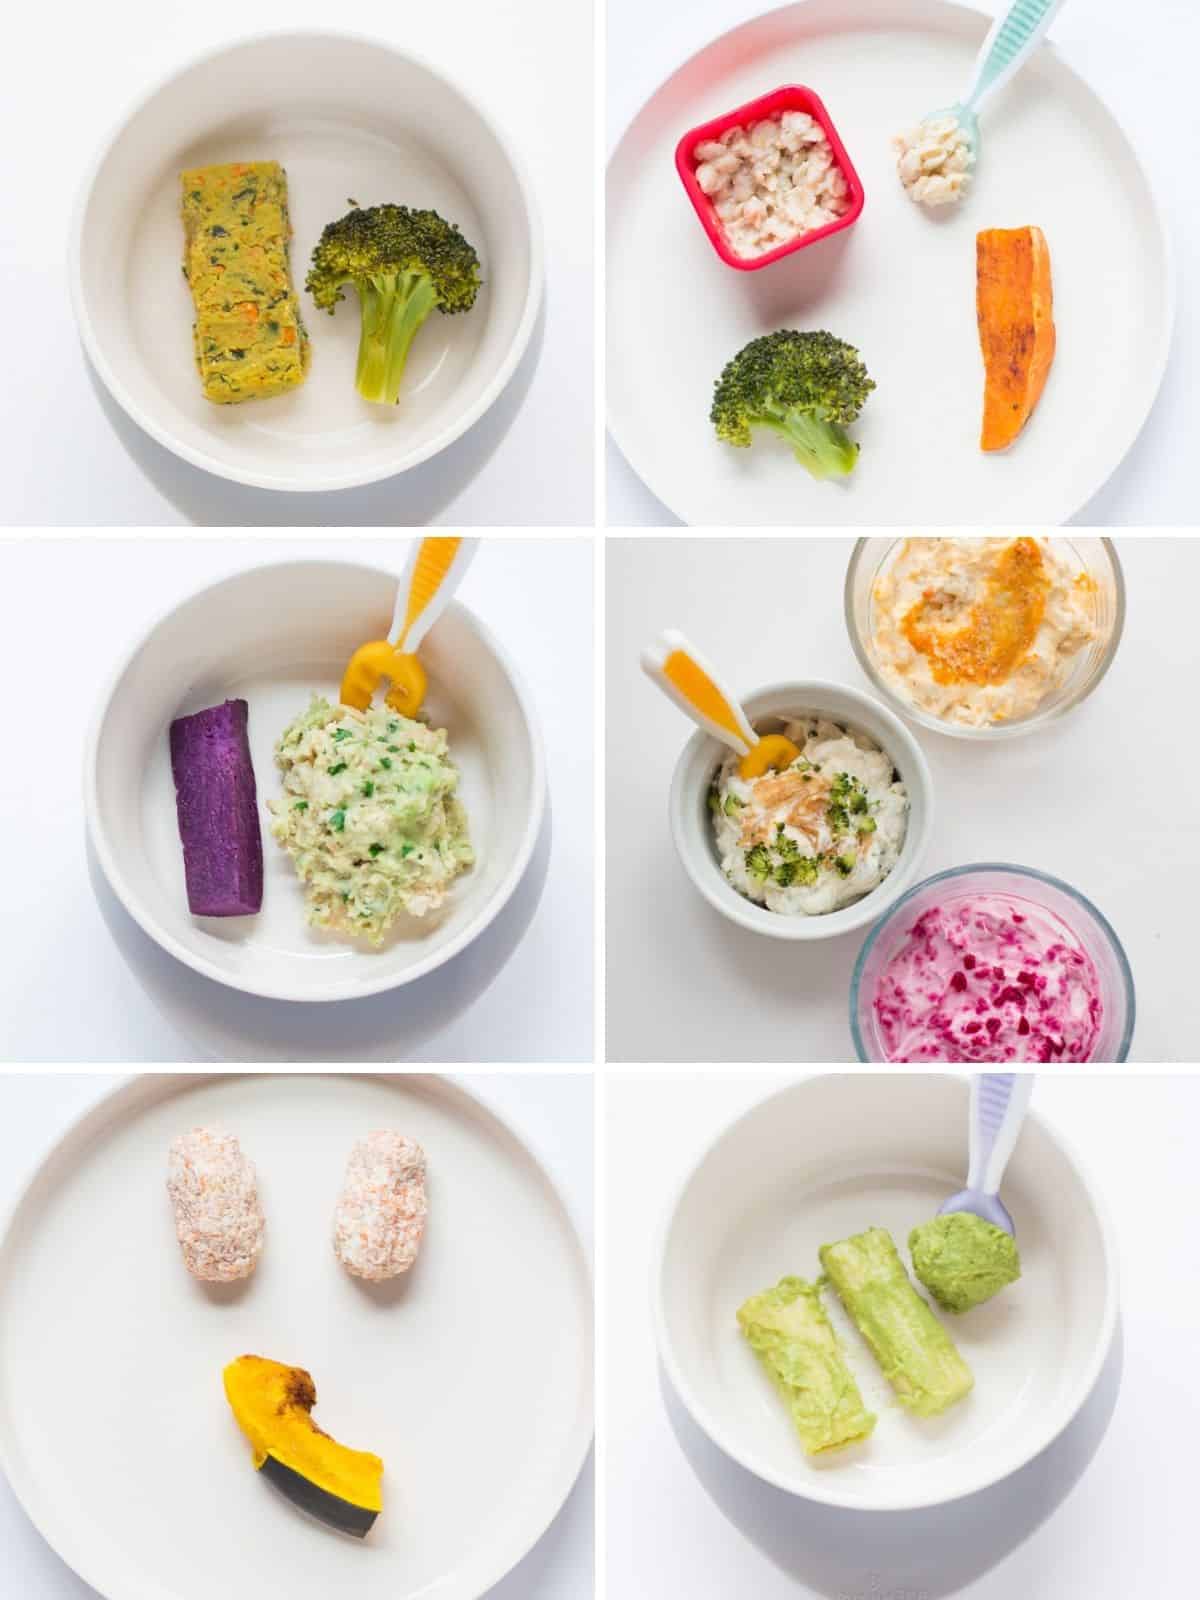 A six image collage showing different ways to serve vegetables to babies